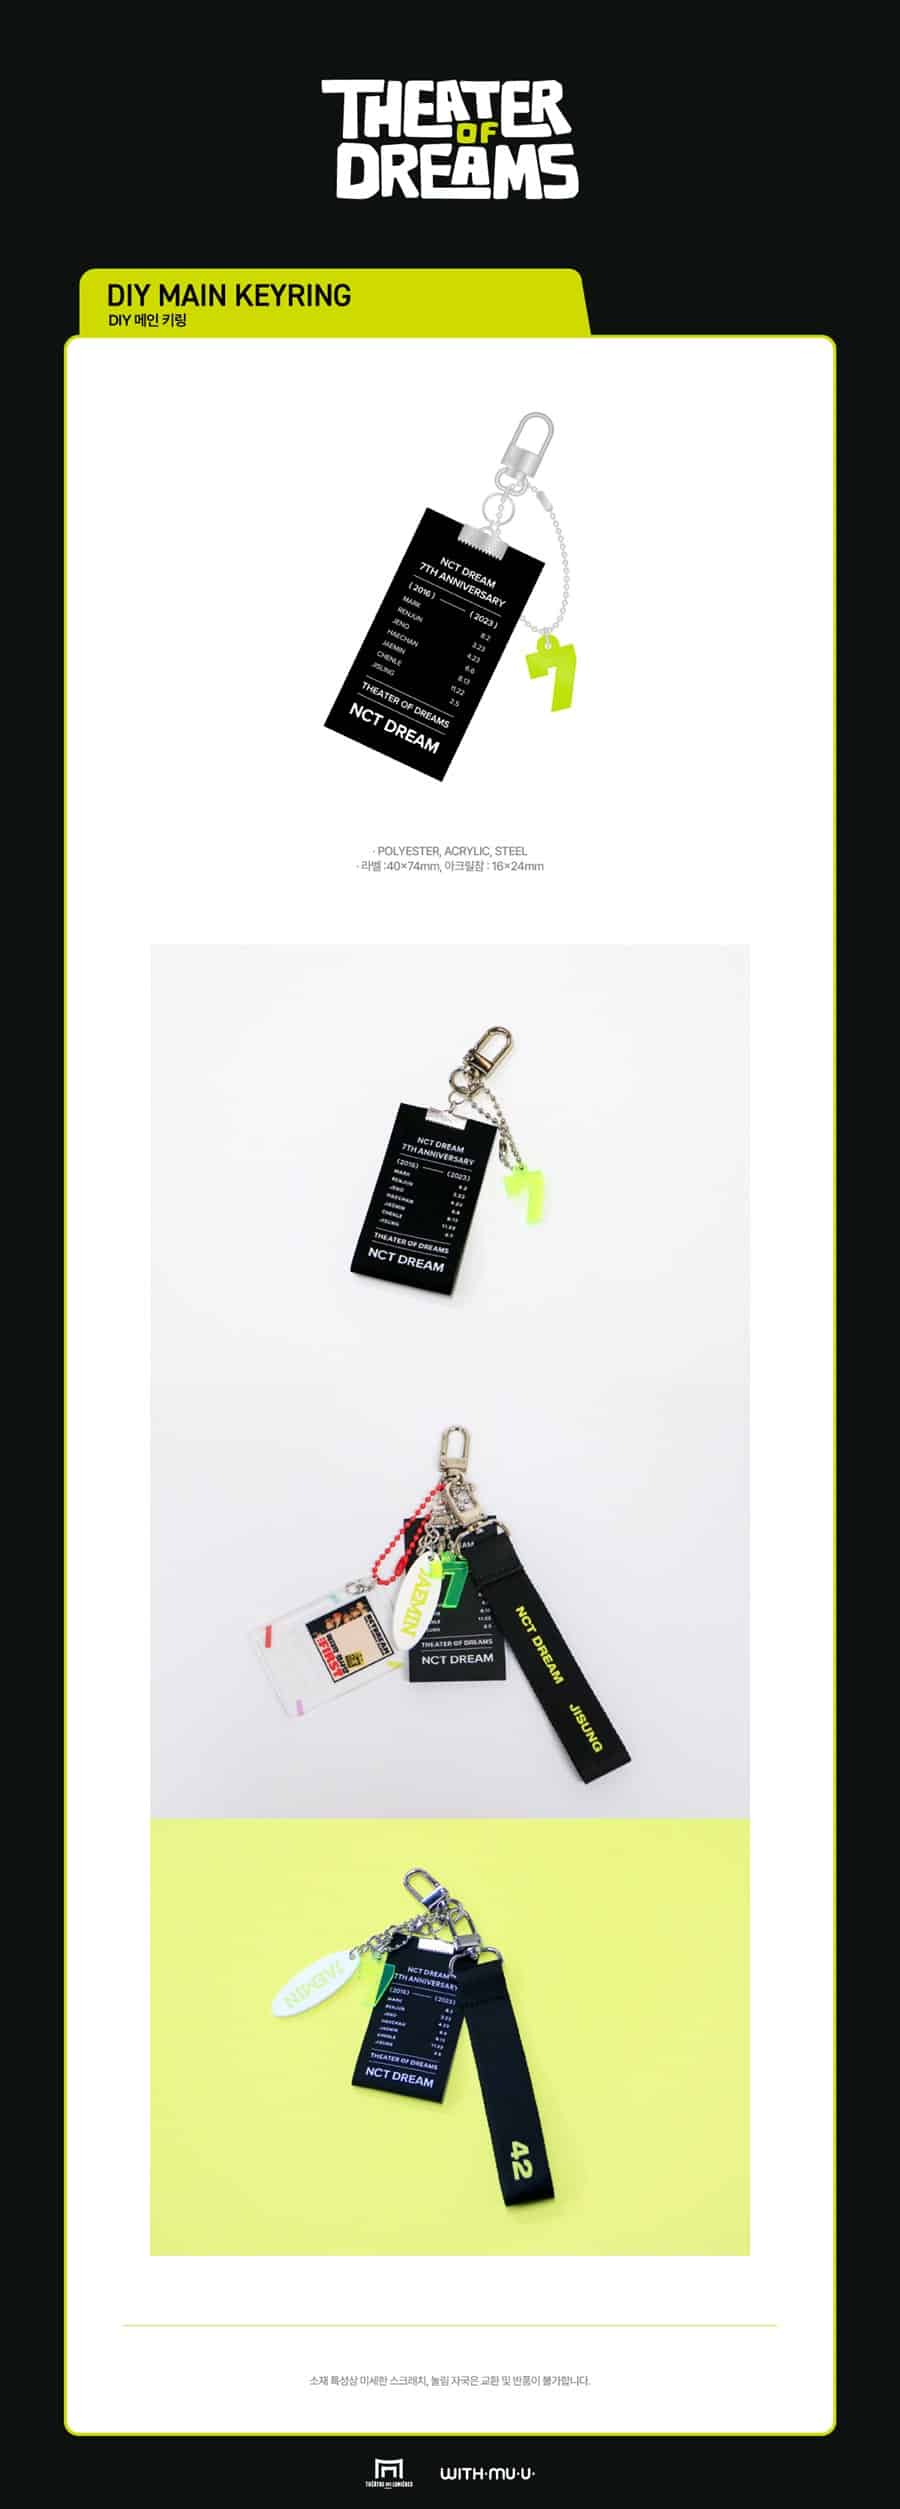 nct-dream-01-diy-main-keyring-2024-nct-dream-theater-of-dreams-official-md-wholesales